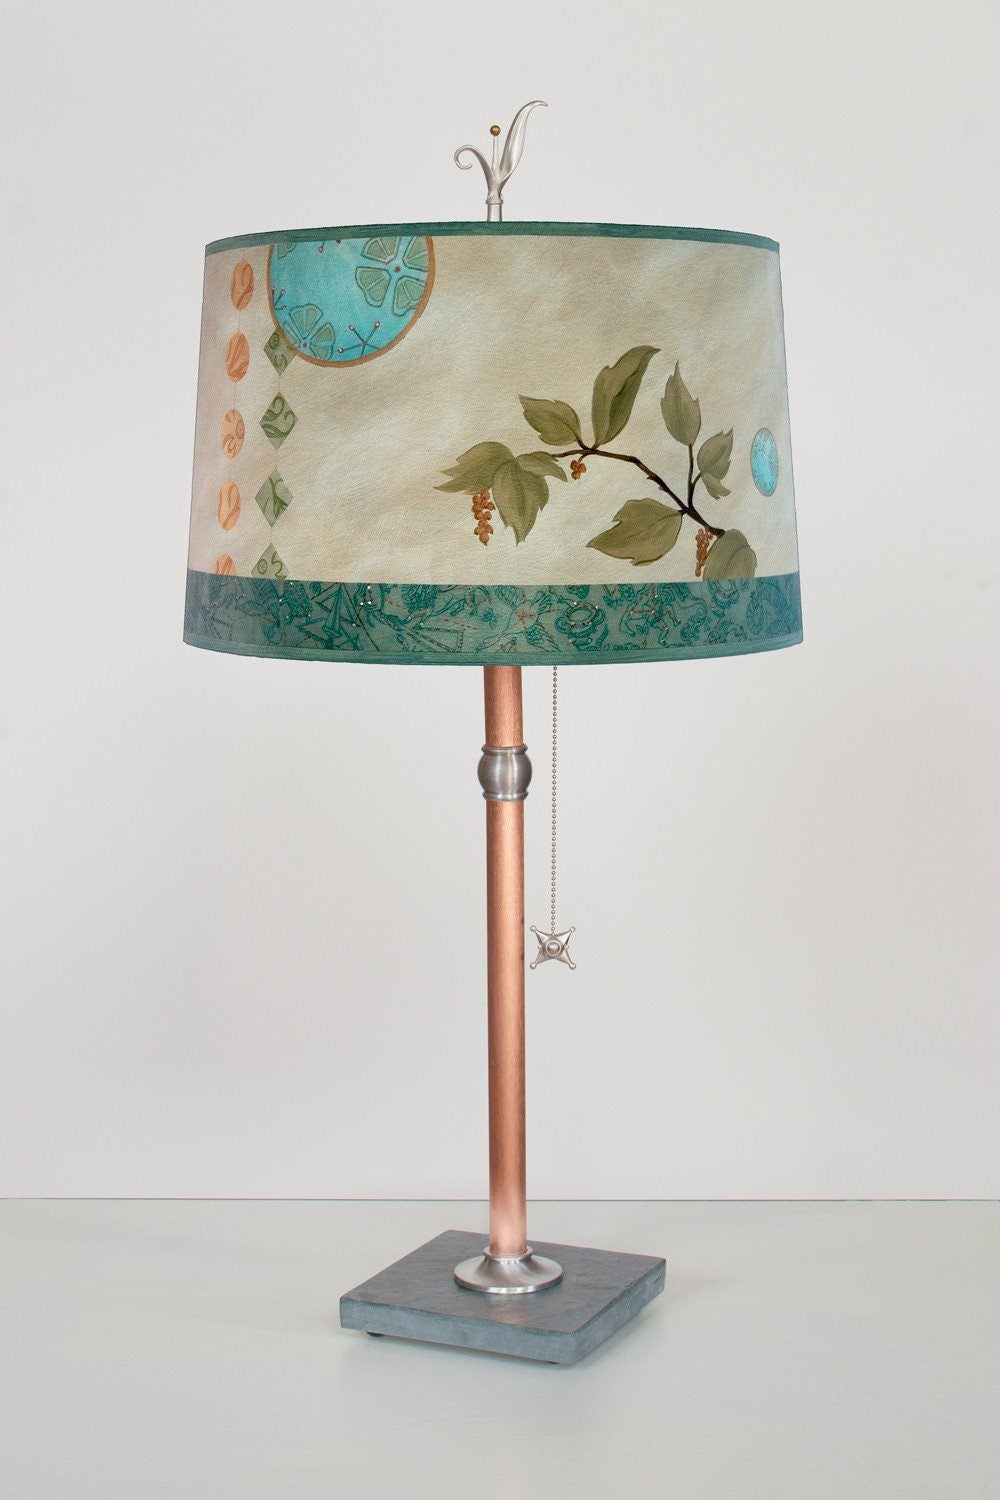 Janna Ugone & Co Table Lamps Copper Table Lamp with Large Drum Shade in Celestial Leaf